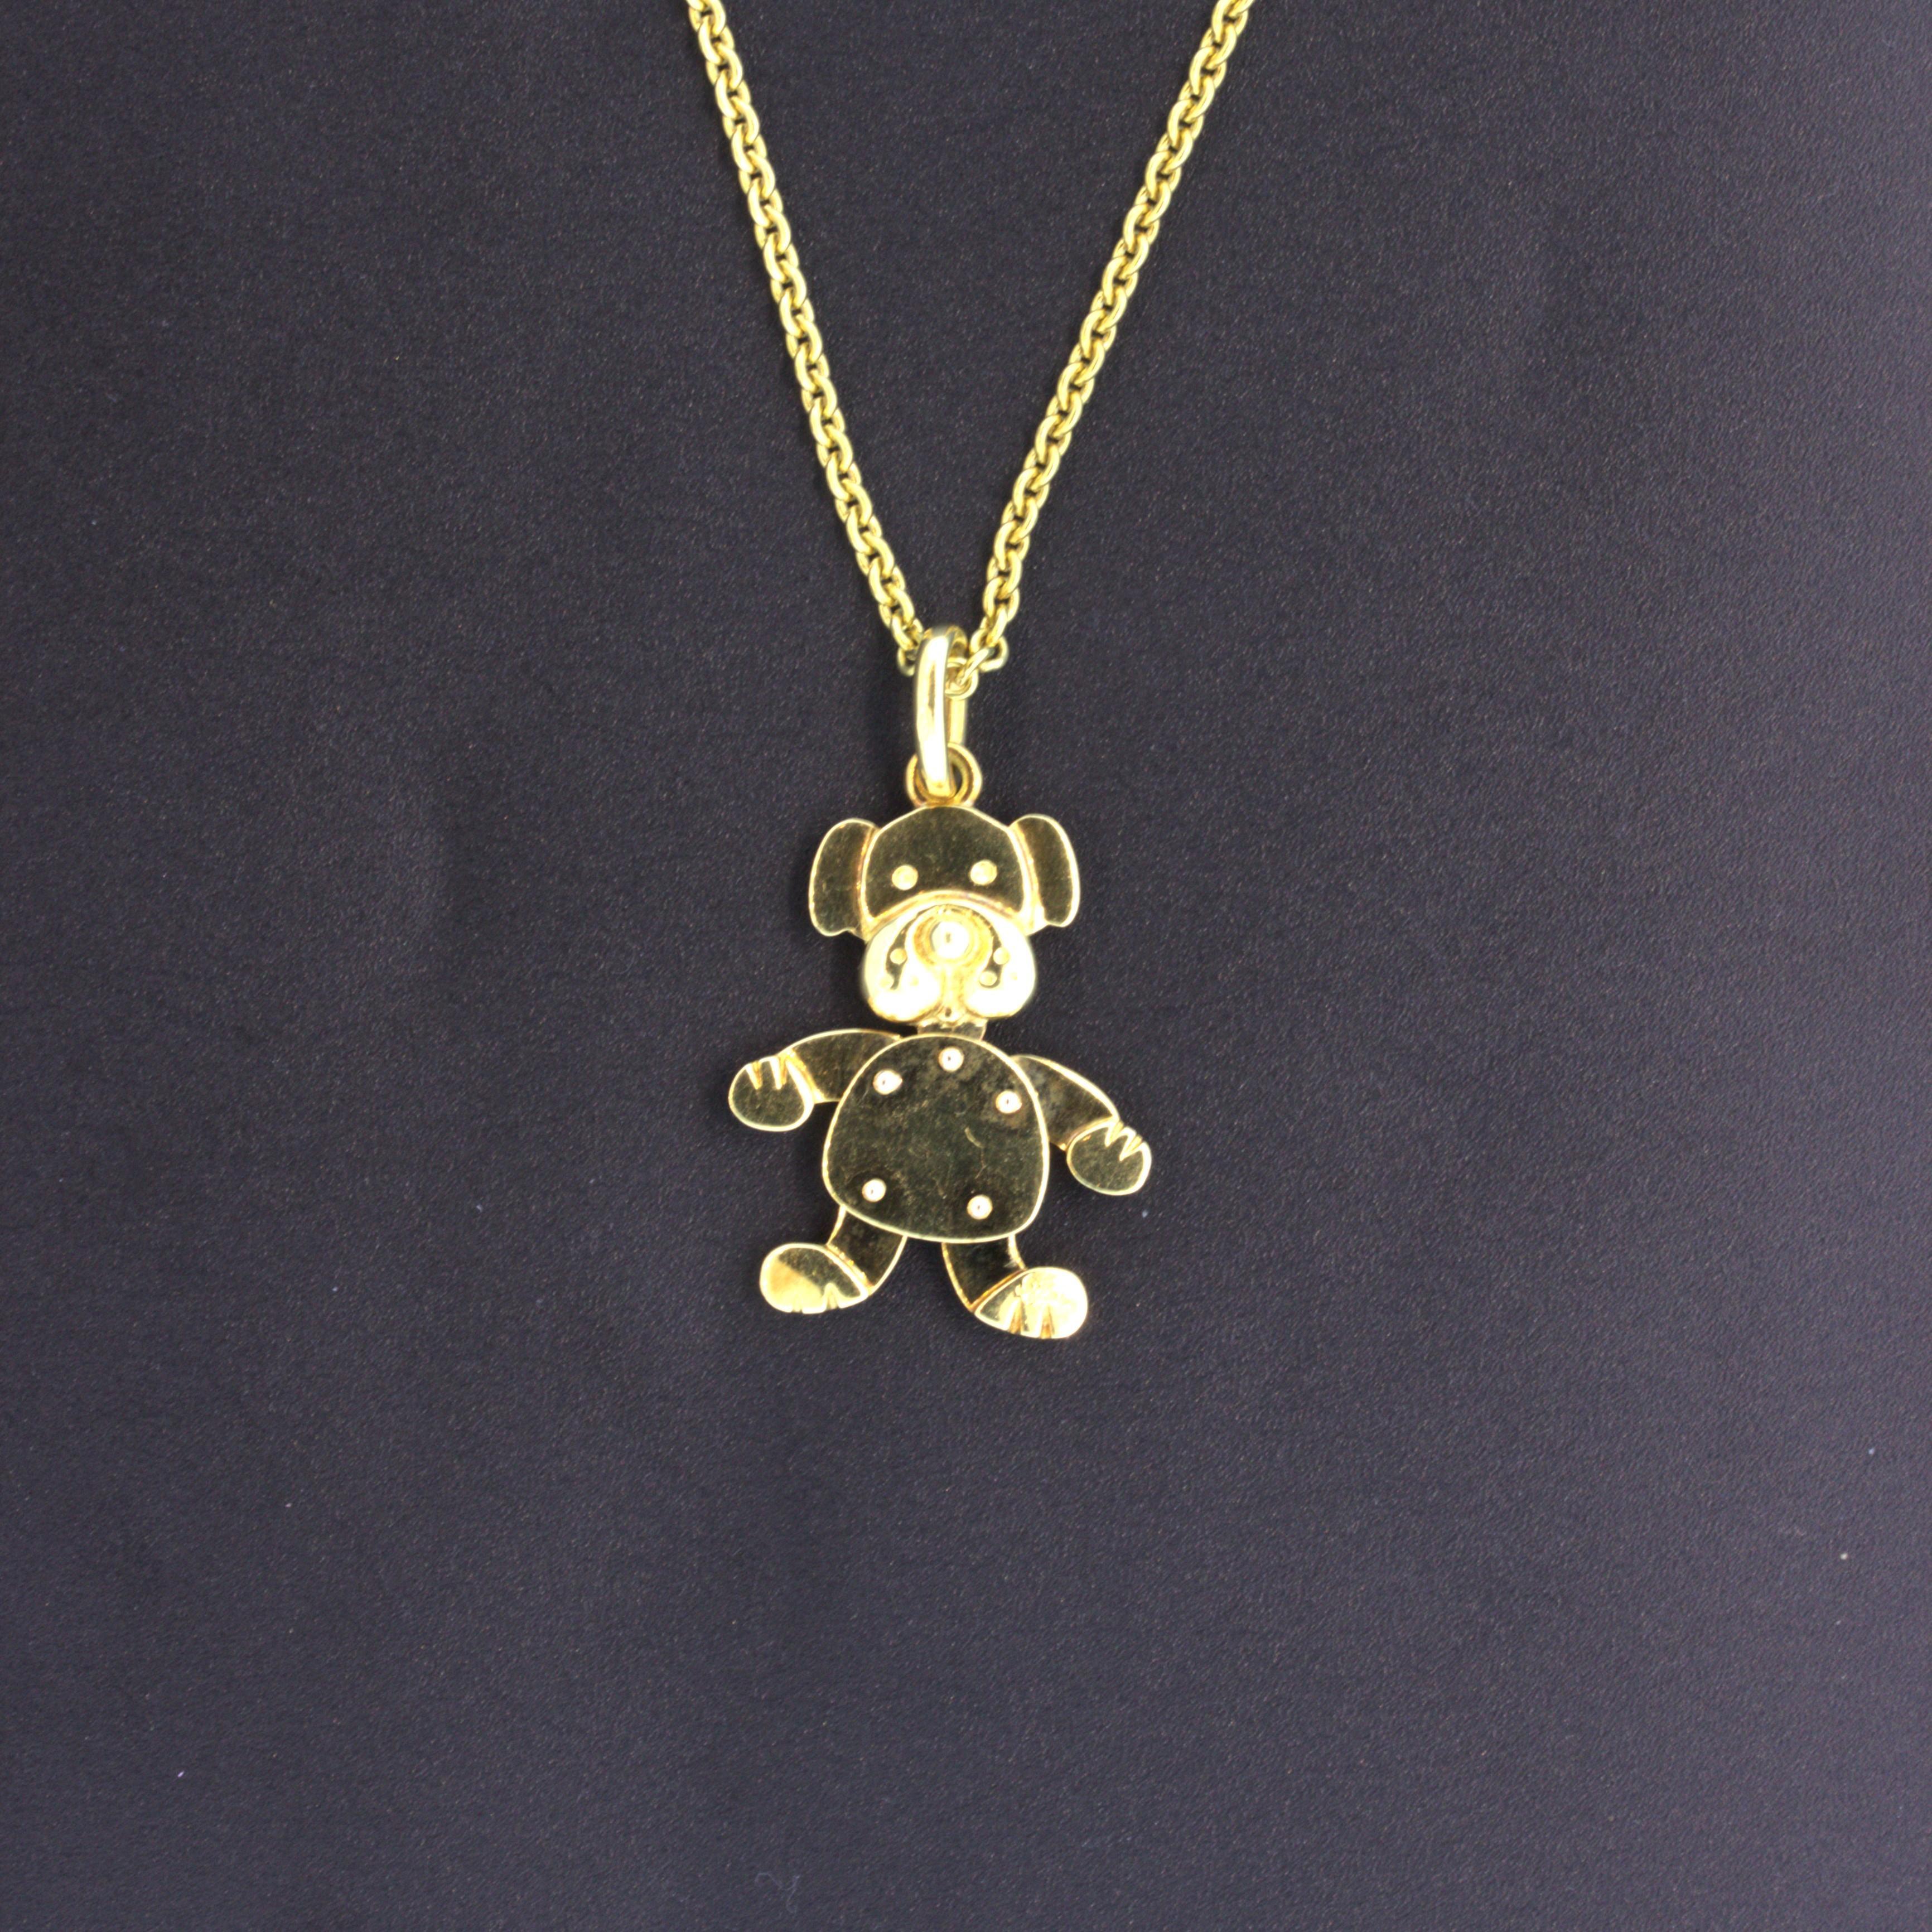 Pomellato 18k Yellow Gold Puppy Dog Pendant Necklace In New Condition For Sale In Beverly Hills, CA